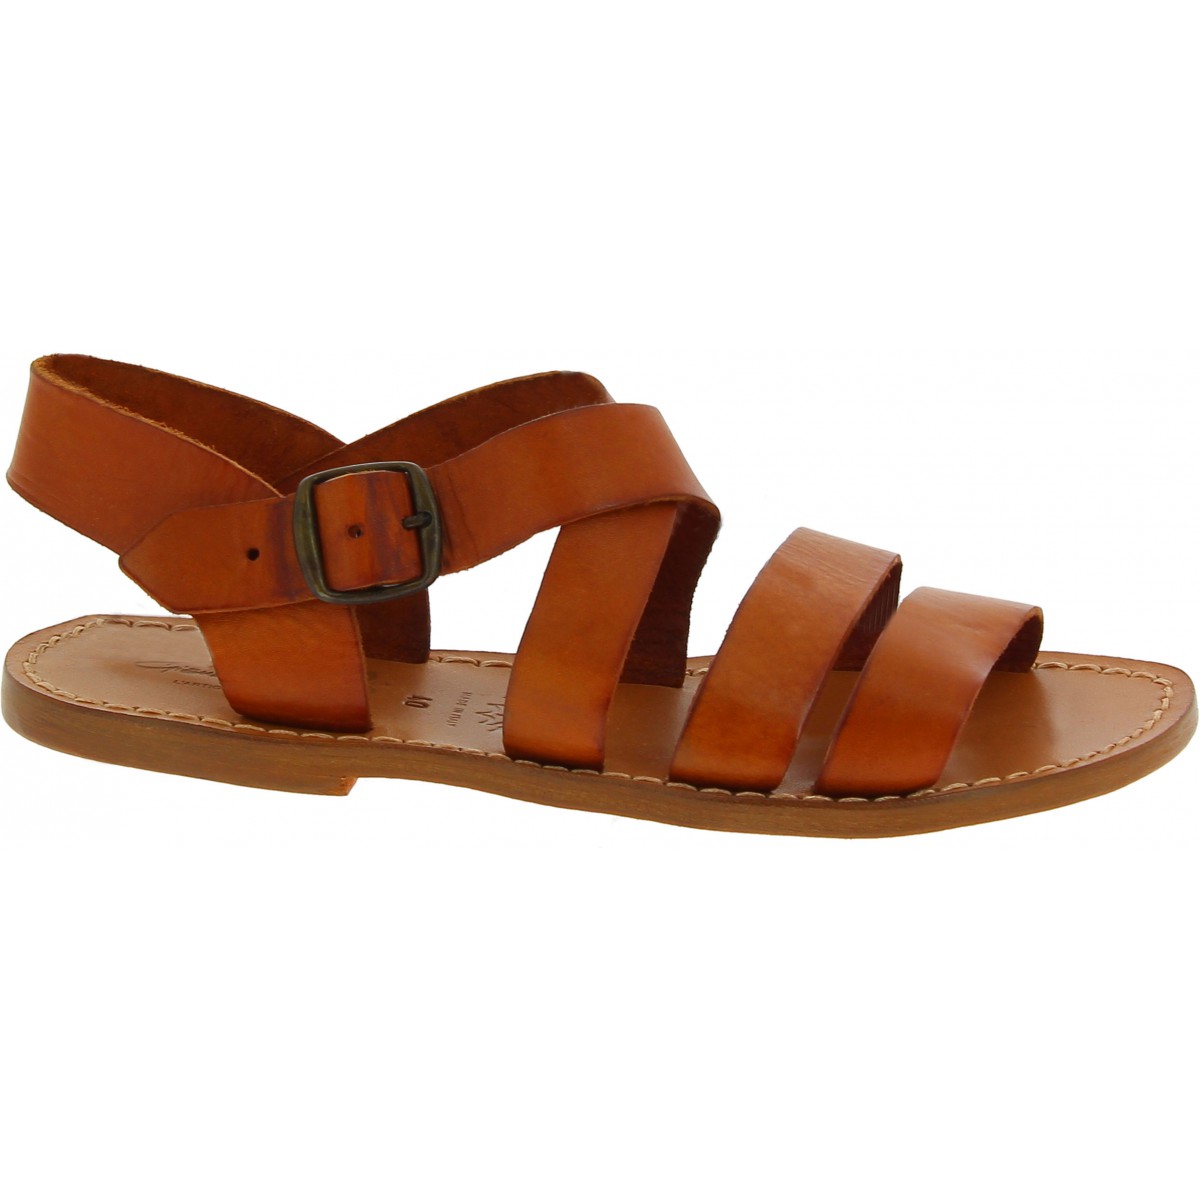 Genuine tan leather women's franciscan sandals handmade in Italy | The ...